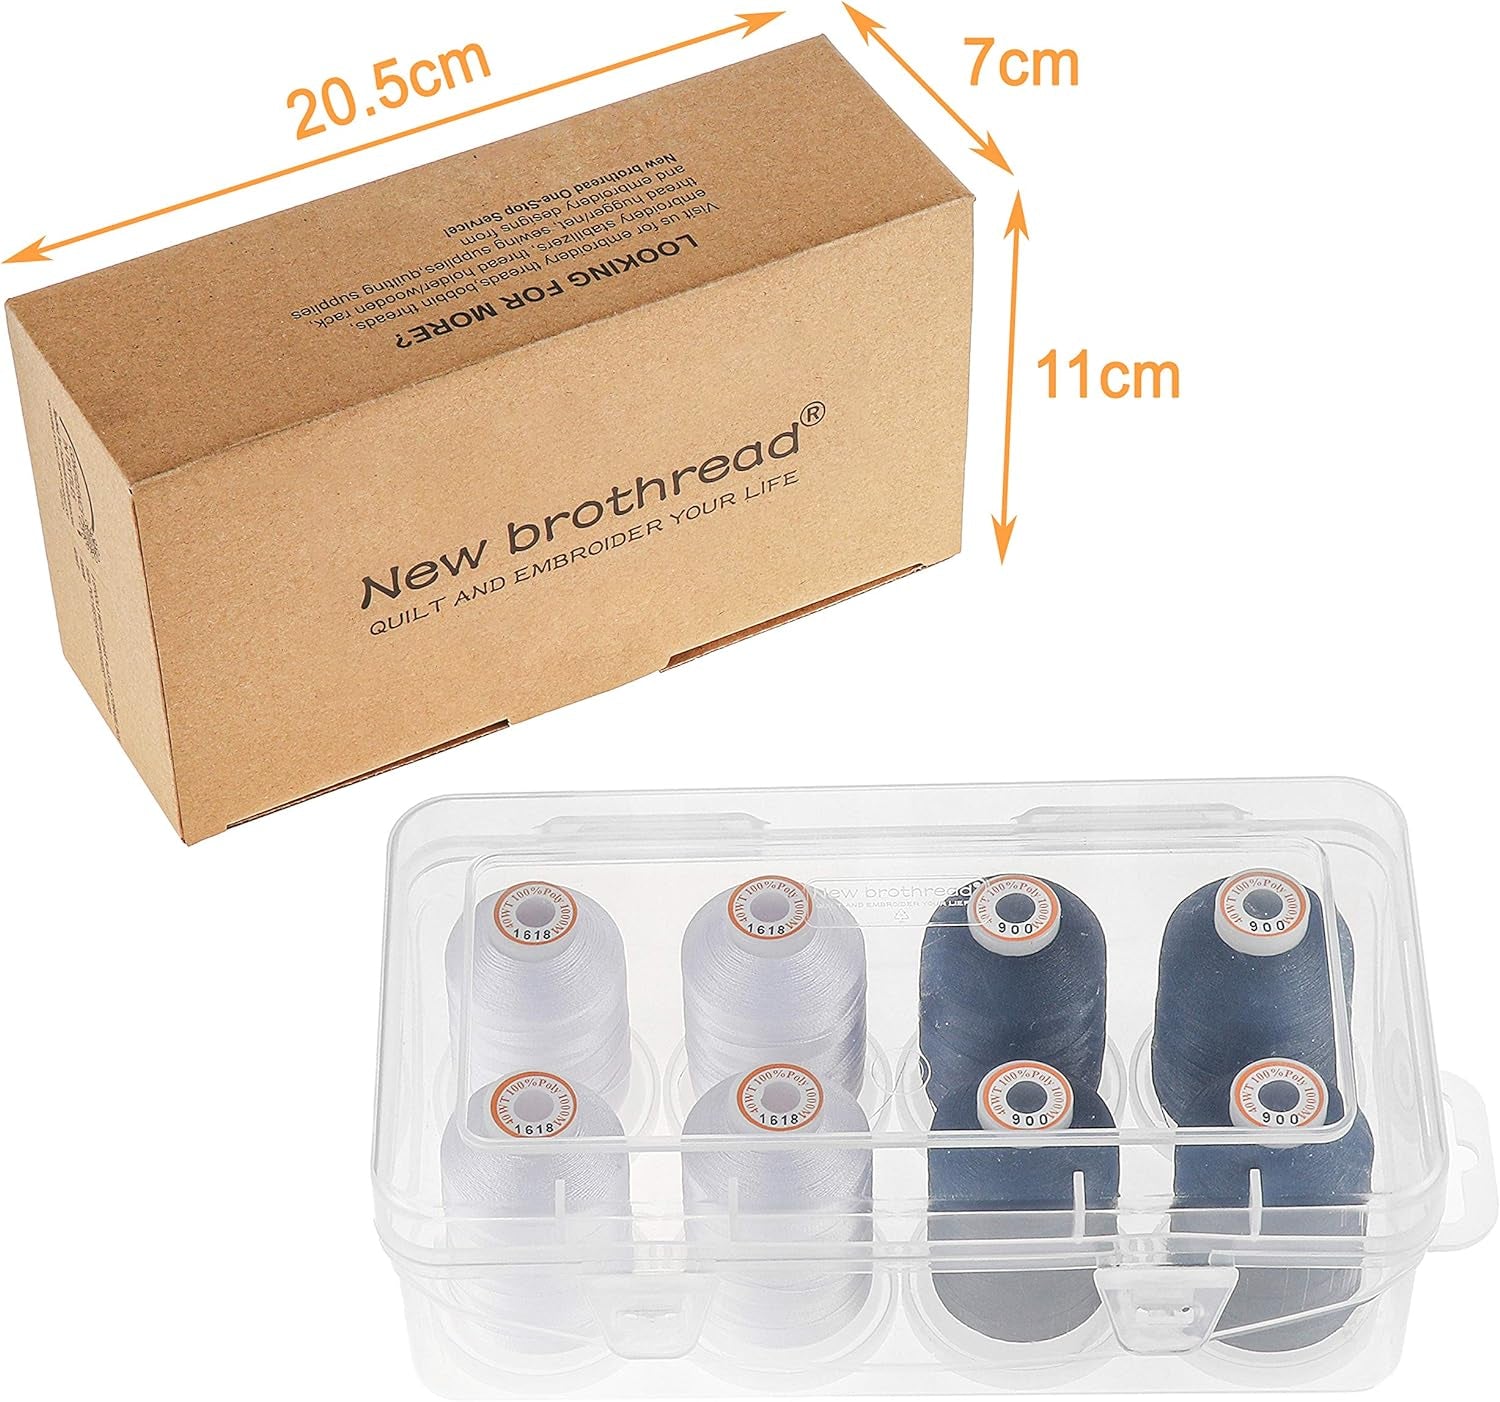 Polyester Embroidery Machine Thread 1000M Each with Clear Plastic Storage Box for Embroidery & Quilting - 4Xsnow White+4Xblack